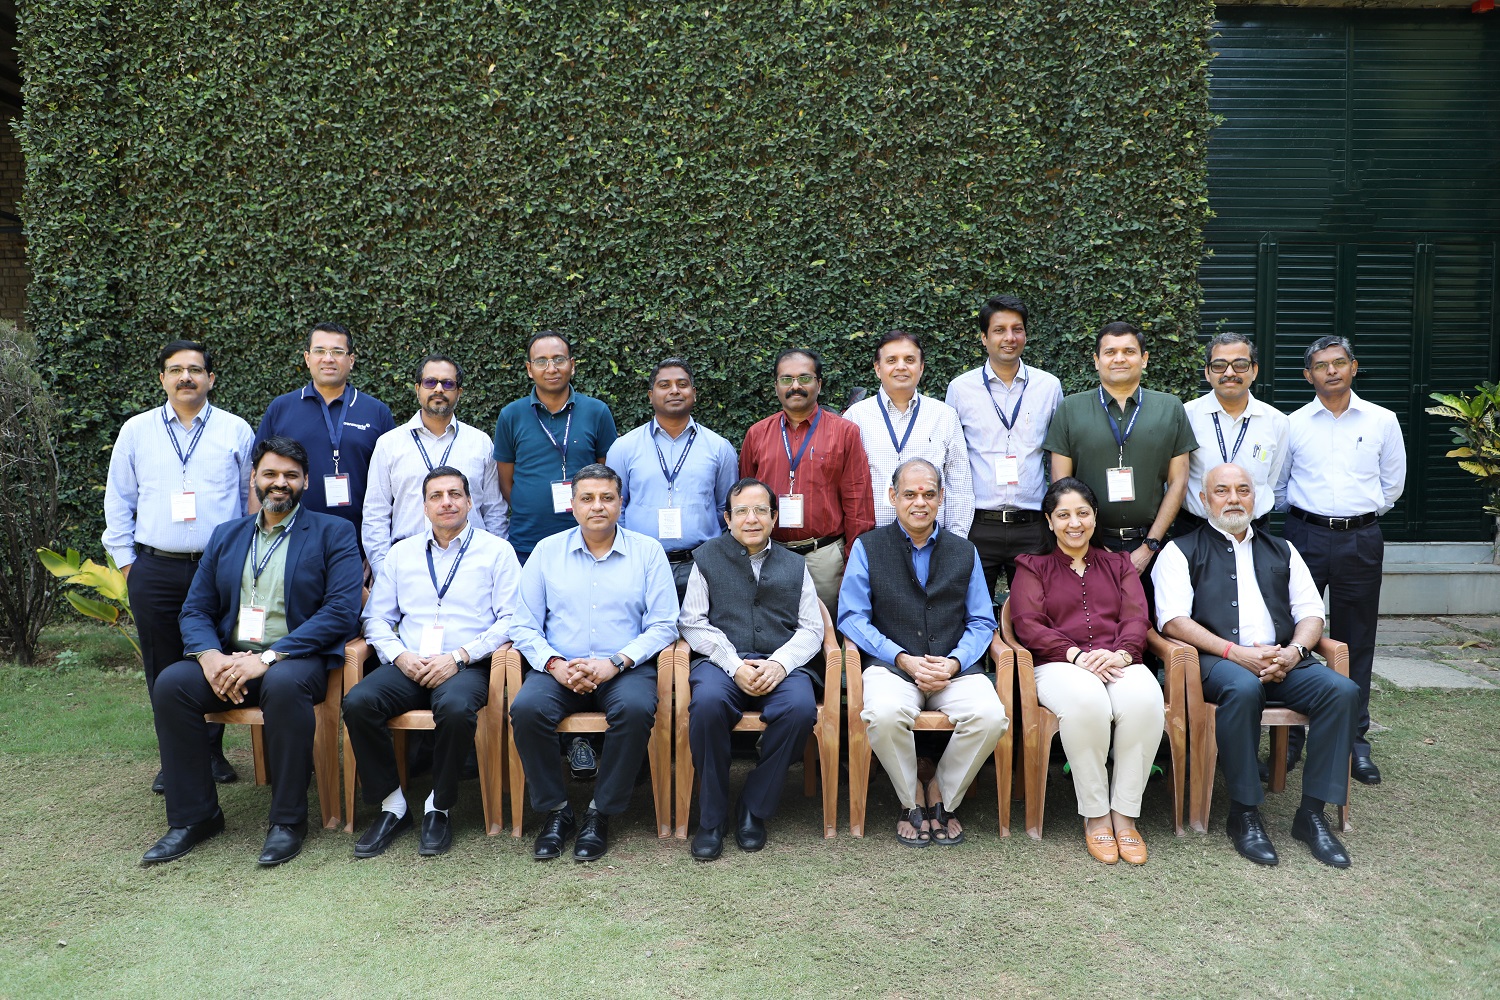 Participants of the programme Inspirational Leadership Skills for the Post-Pandemic Era: Insights from Bhagavad Gita, on 22nd February 2023.